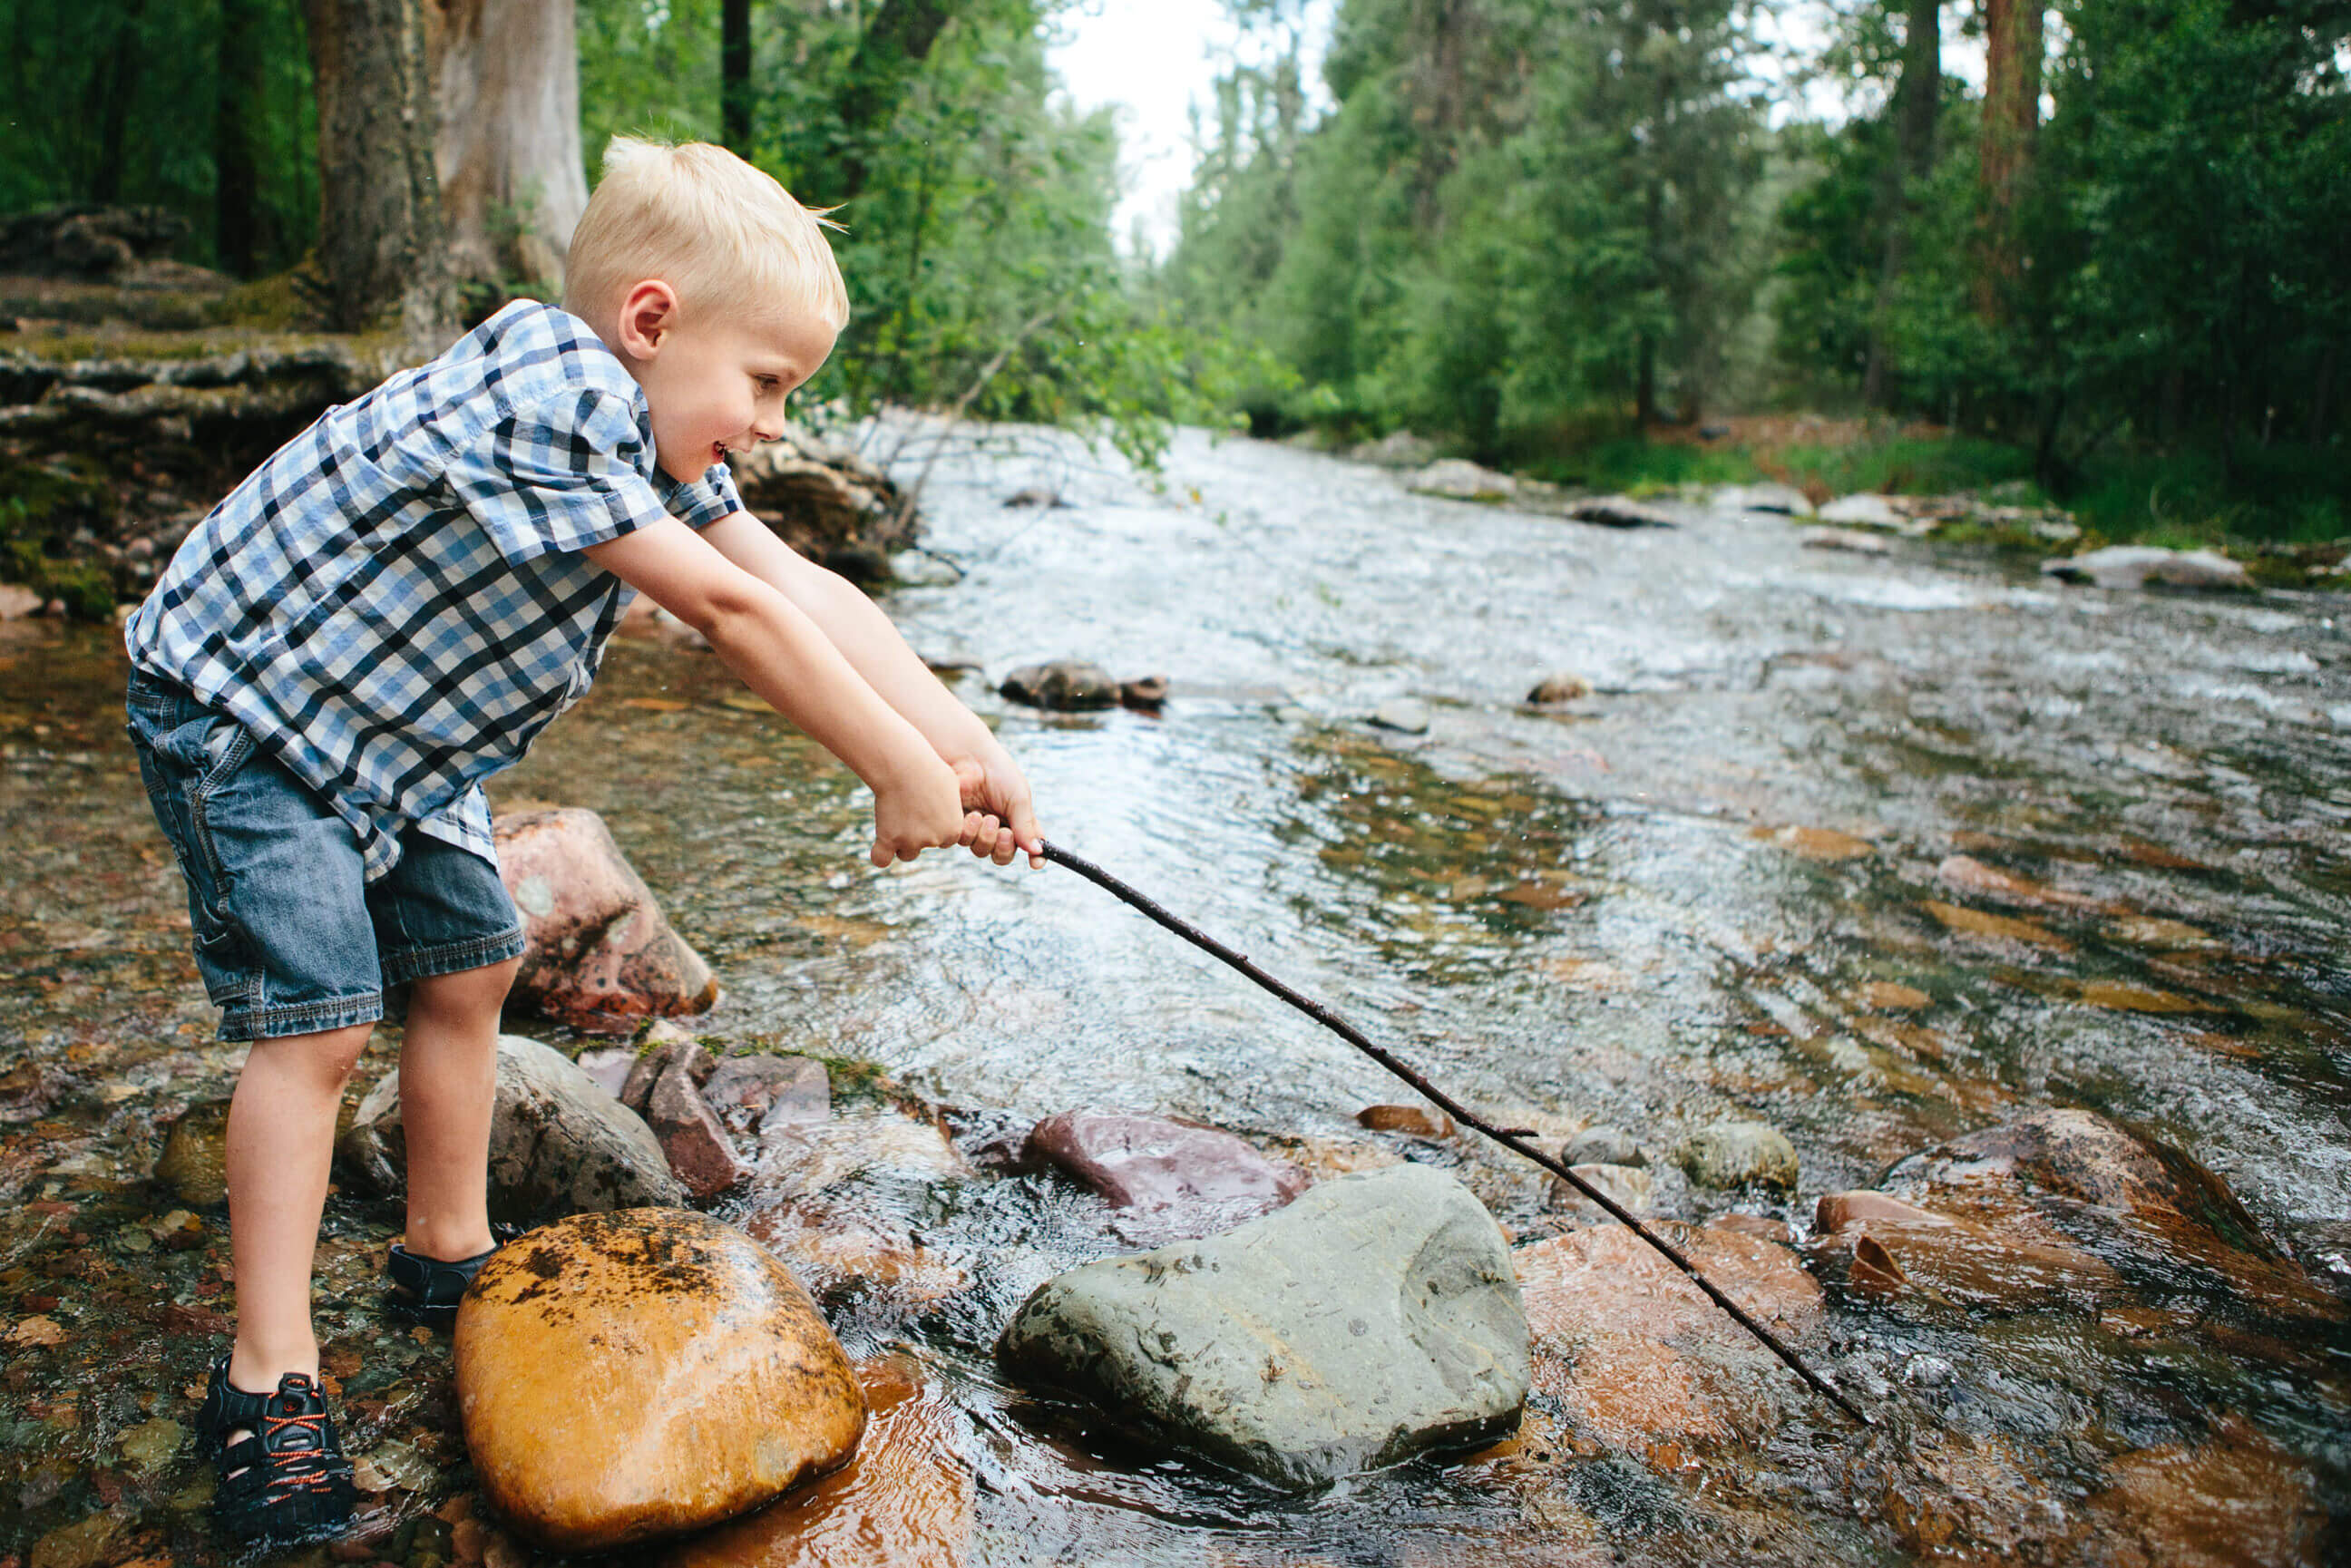 A young boy fishes with a stick in a creek in Missoula Montana